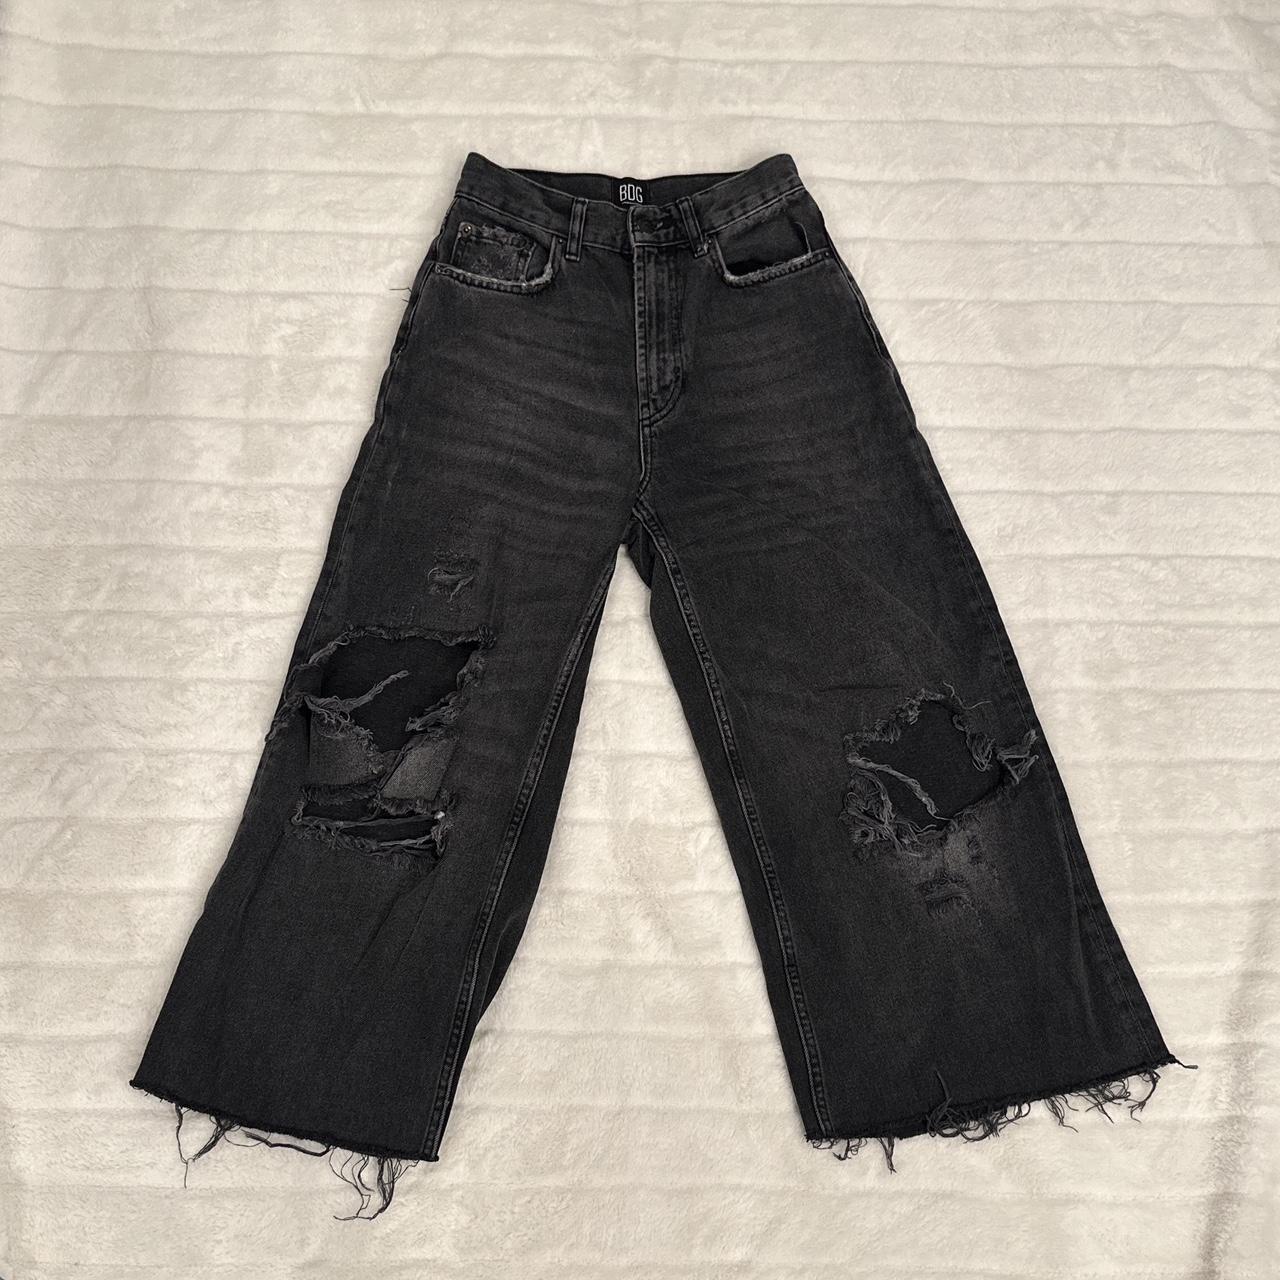 BDG urban outfitters skater baggy jeans high... - Depop